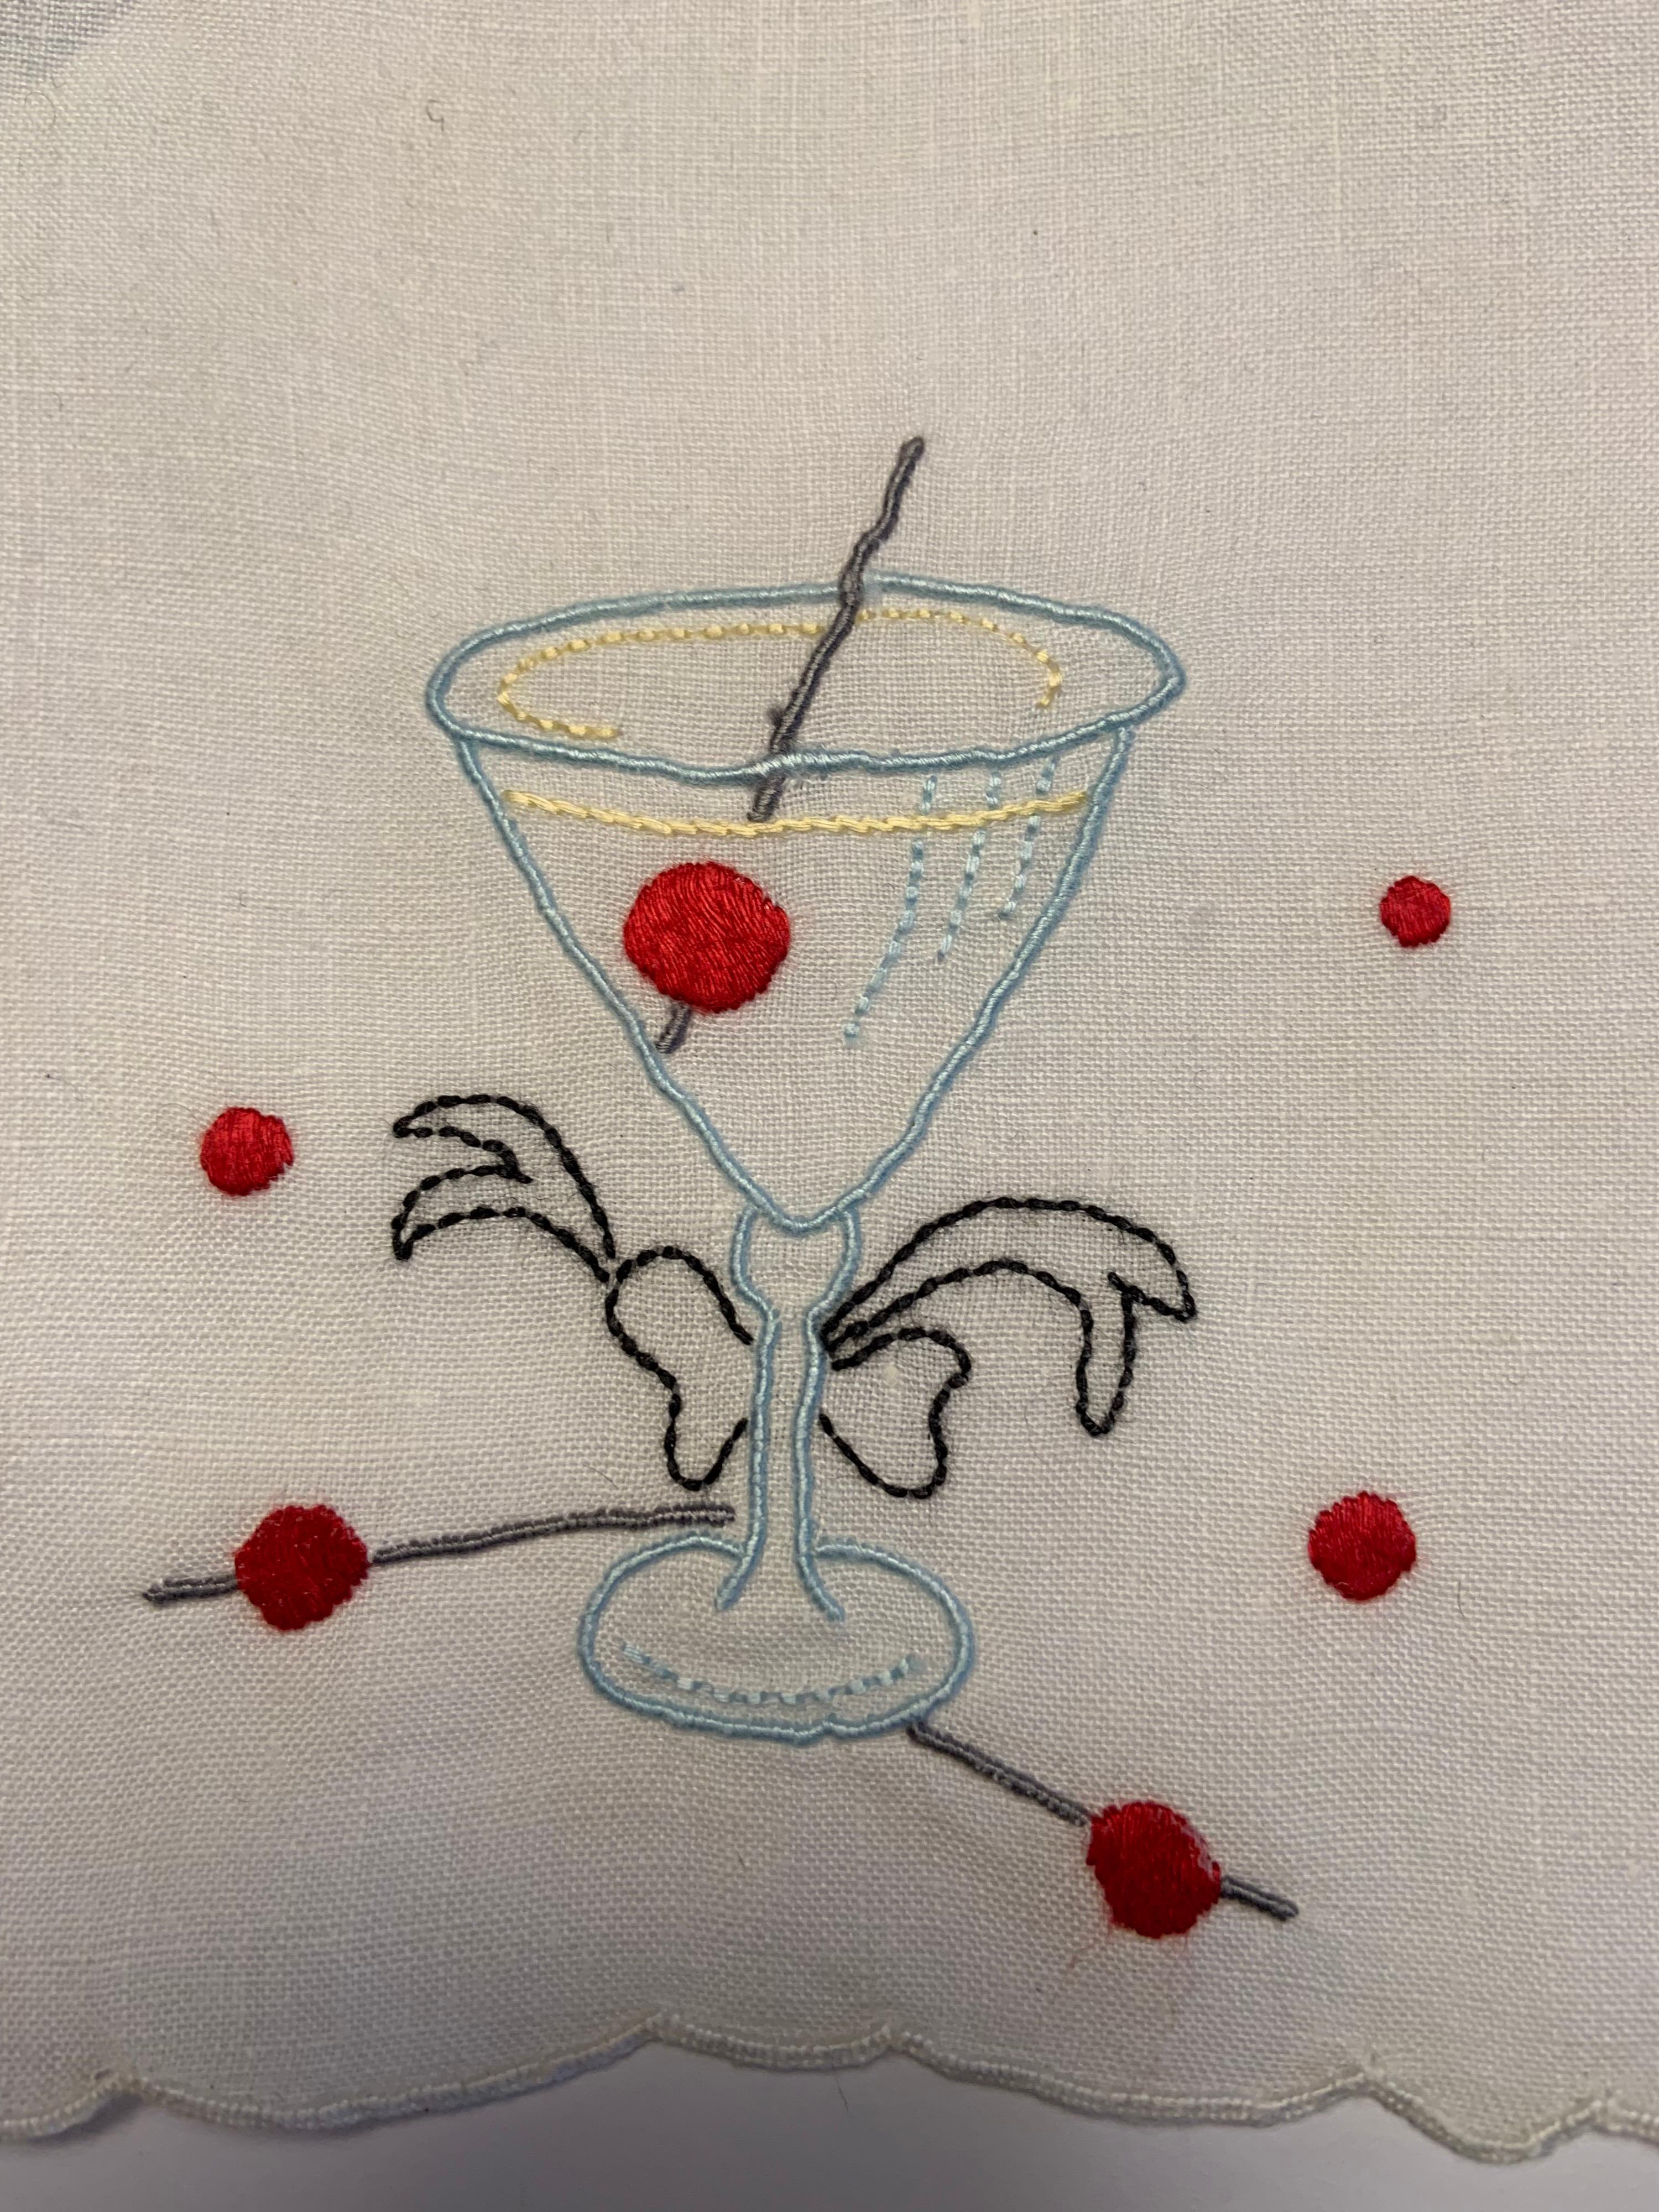 A sleek stemmed Manhattan cocktail glass is embroidered in blue with a red cherry and grey stirrer inside on this set of twelve white cocktail napkins. They have embroidered red dots adding to the festive look and they are all linen with scalloped